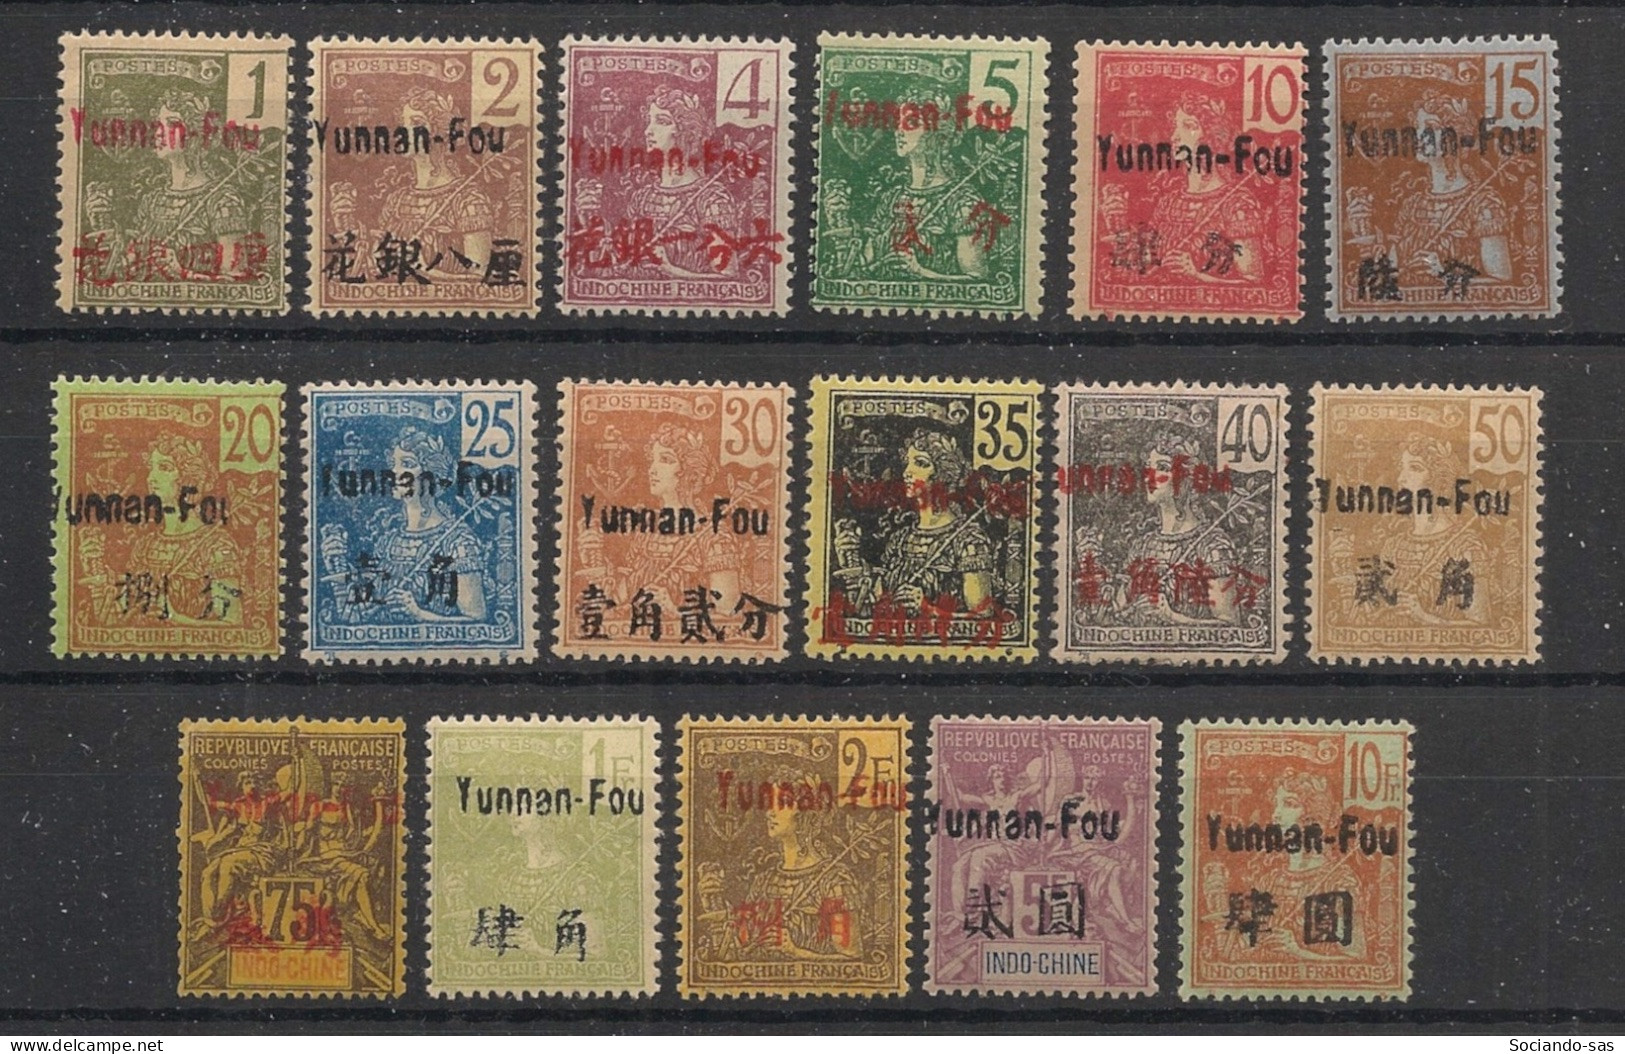 YUNNANFOU - 1906 - N°YT. 16 à 32 - Type Grasset - Série Complète - Neuf * / MH VF - Unused Stamps